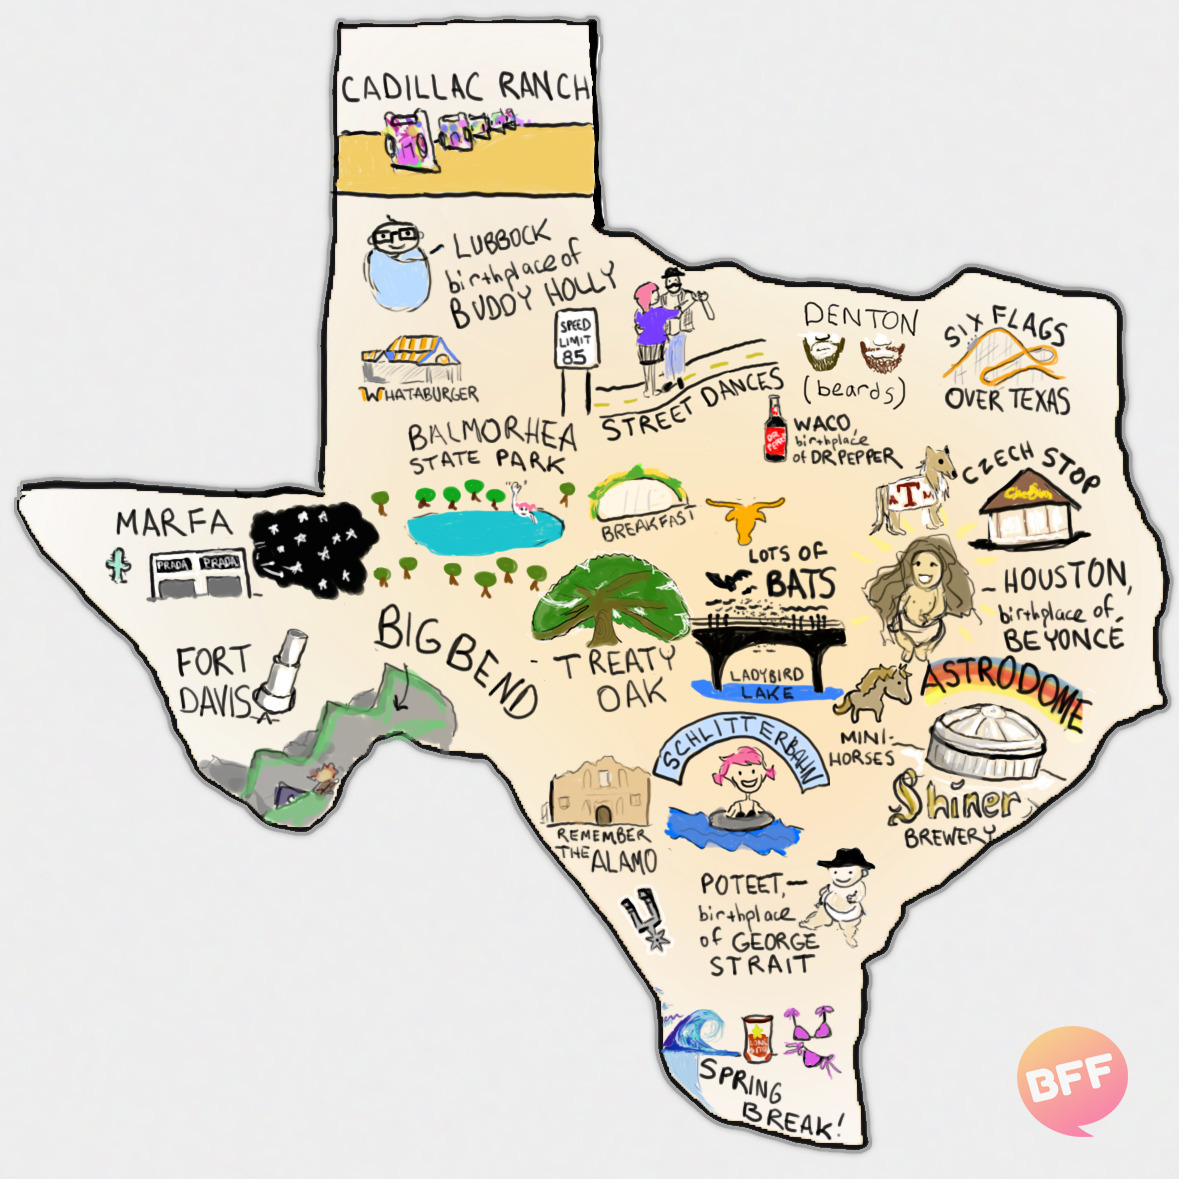 buzzfeed-bff-a-completely-and-accurate-map-of-texas-by-someone